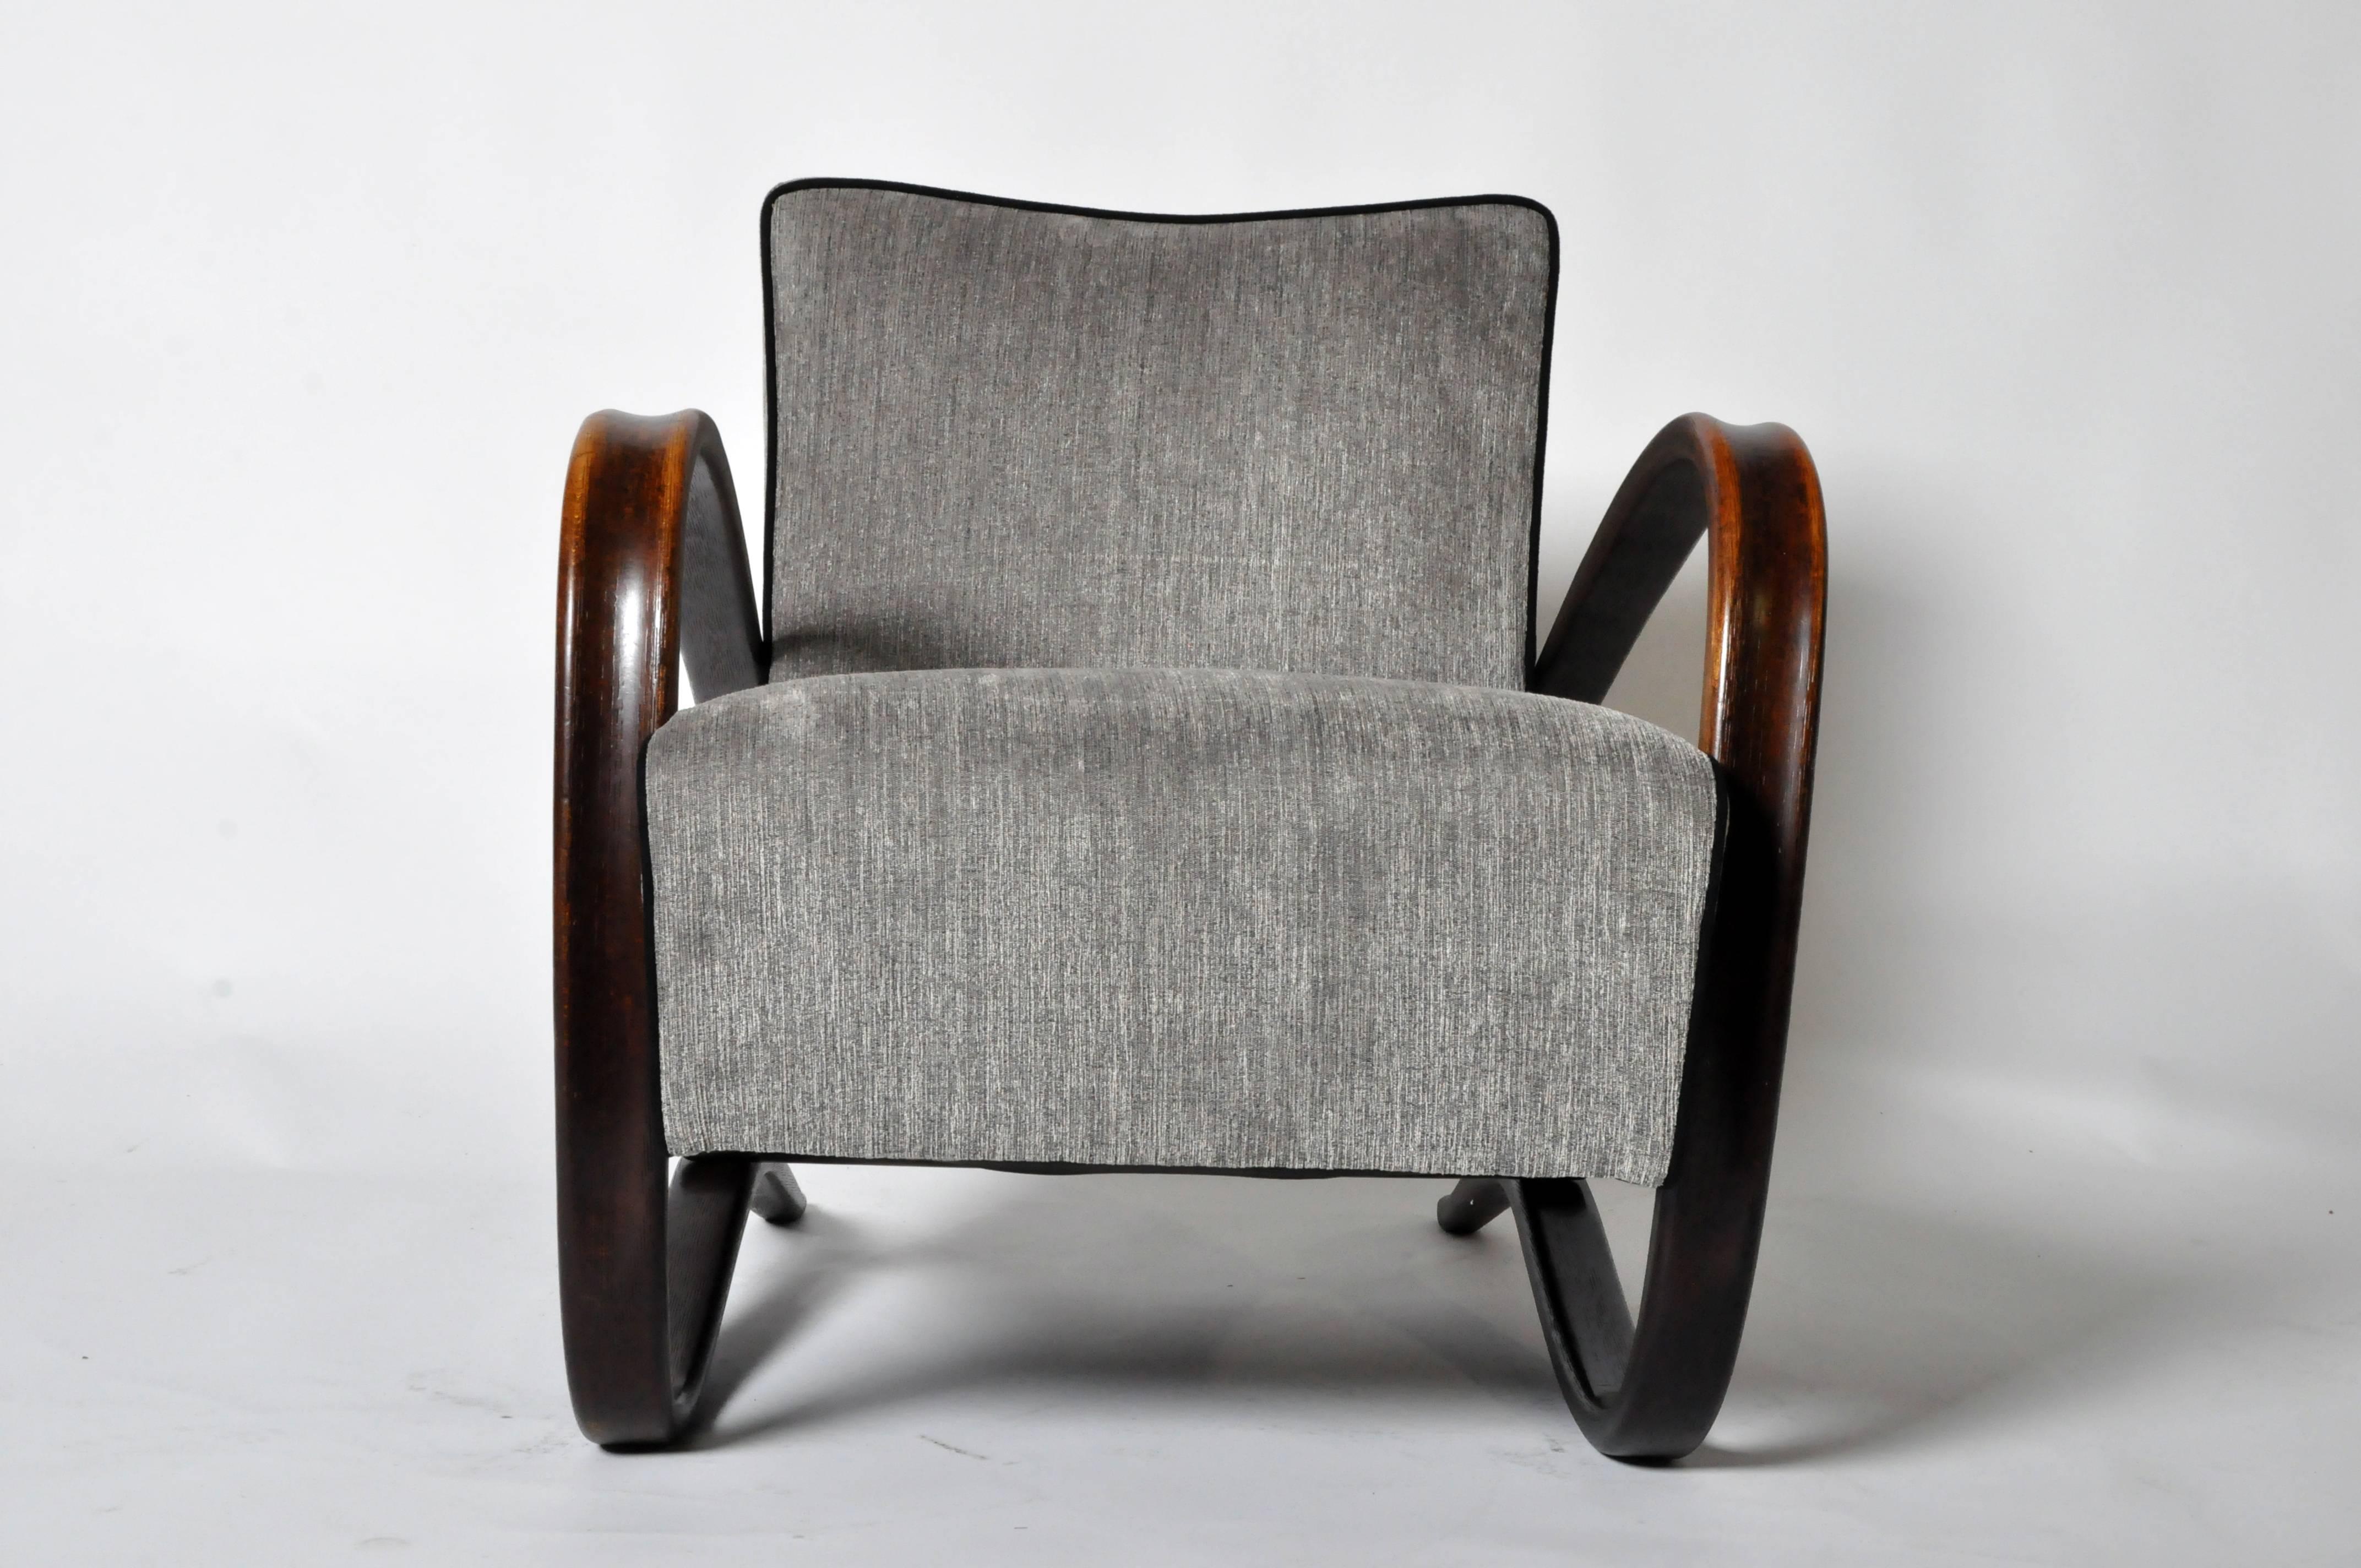 One of the most prominent Czech furniture designers, Jindrich Halabala served as head designer for UP Manufacturing in Brno between 1930 through the mid-1940’s. Having designed most of the “H” model furniture his most recognized pieces are armchairs